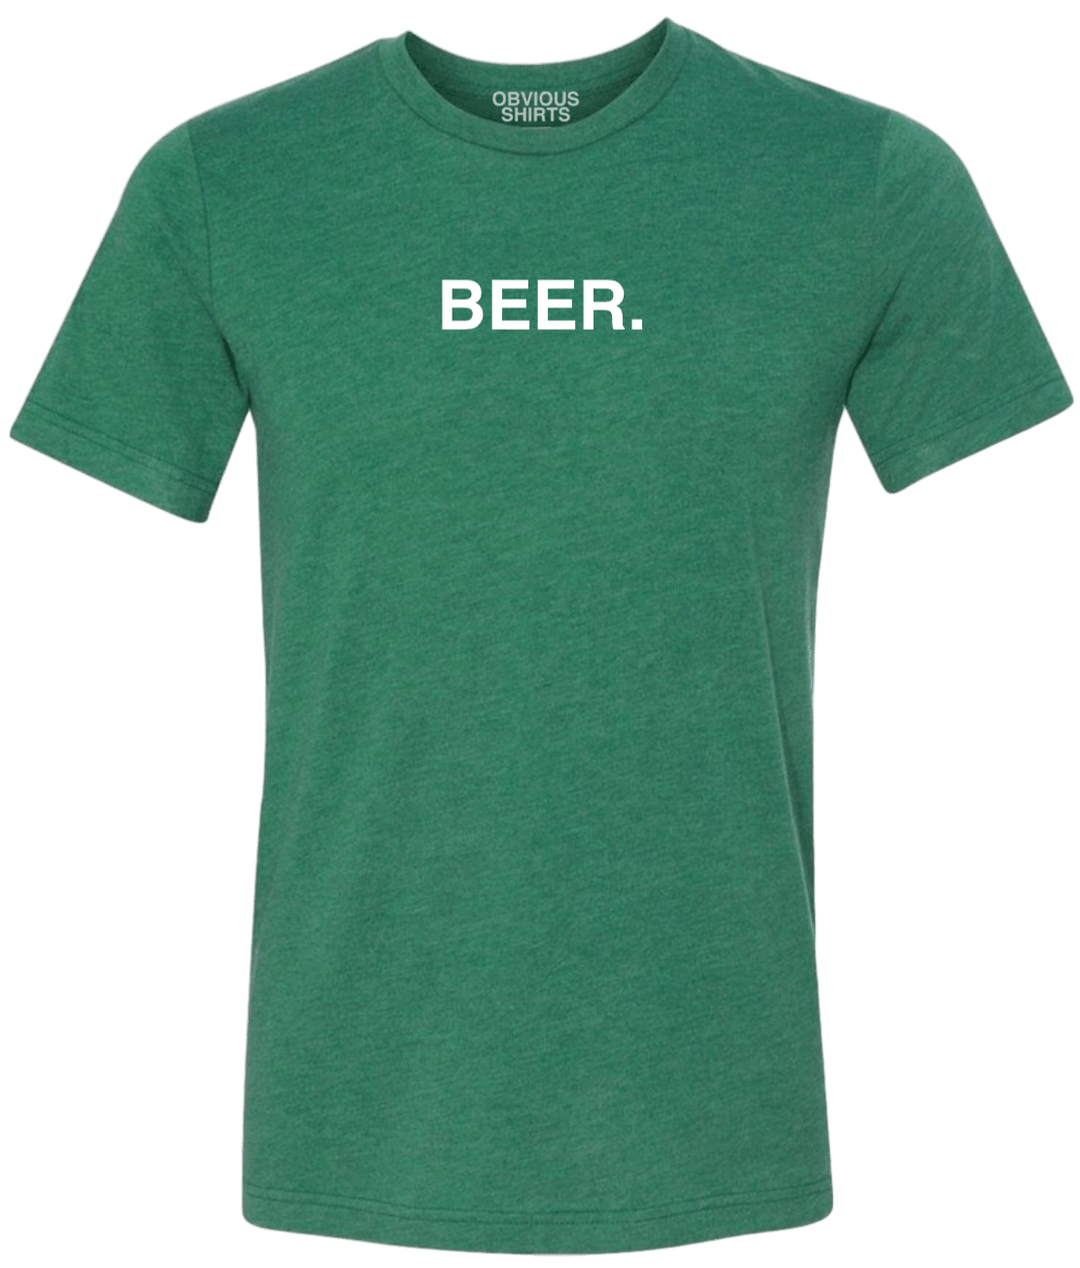 BEER. - OBVIOUS SHIRTS